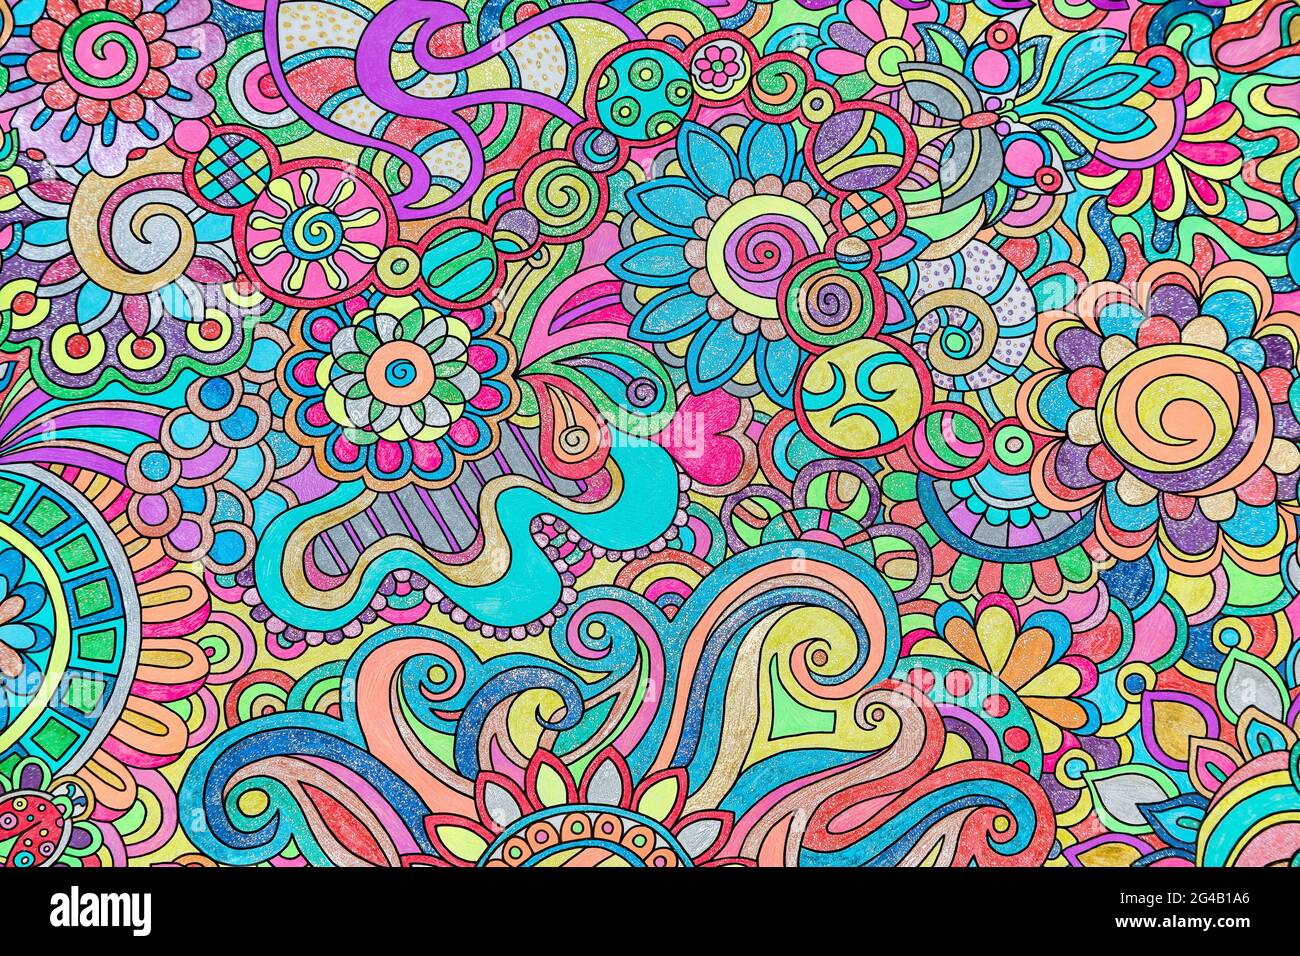 Adult coloring page with gel and glitter pens Stock Photo